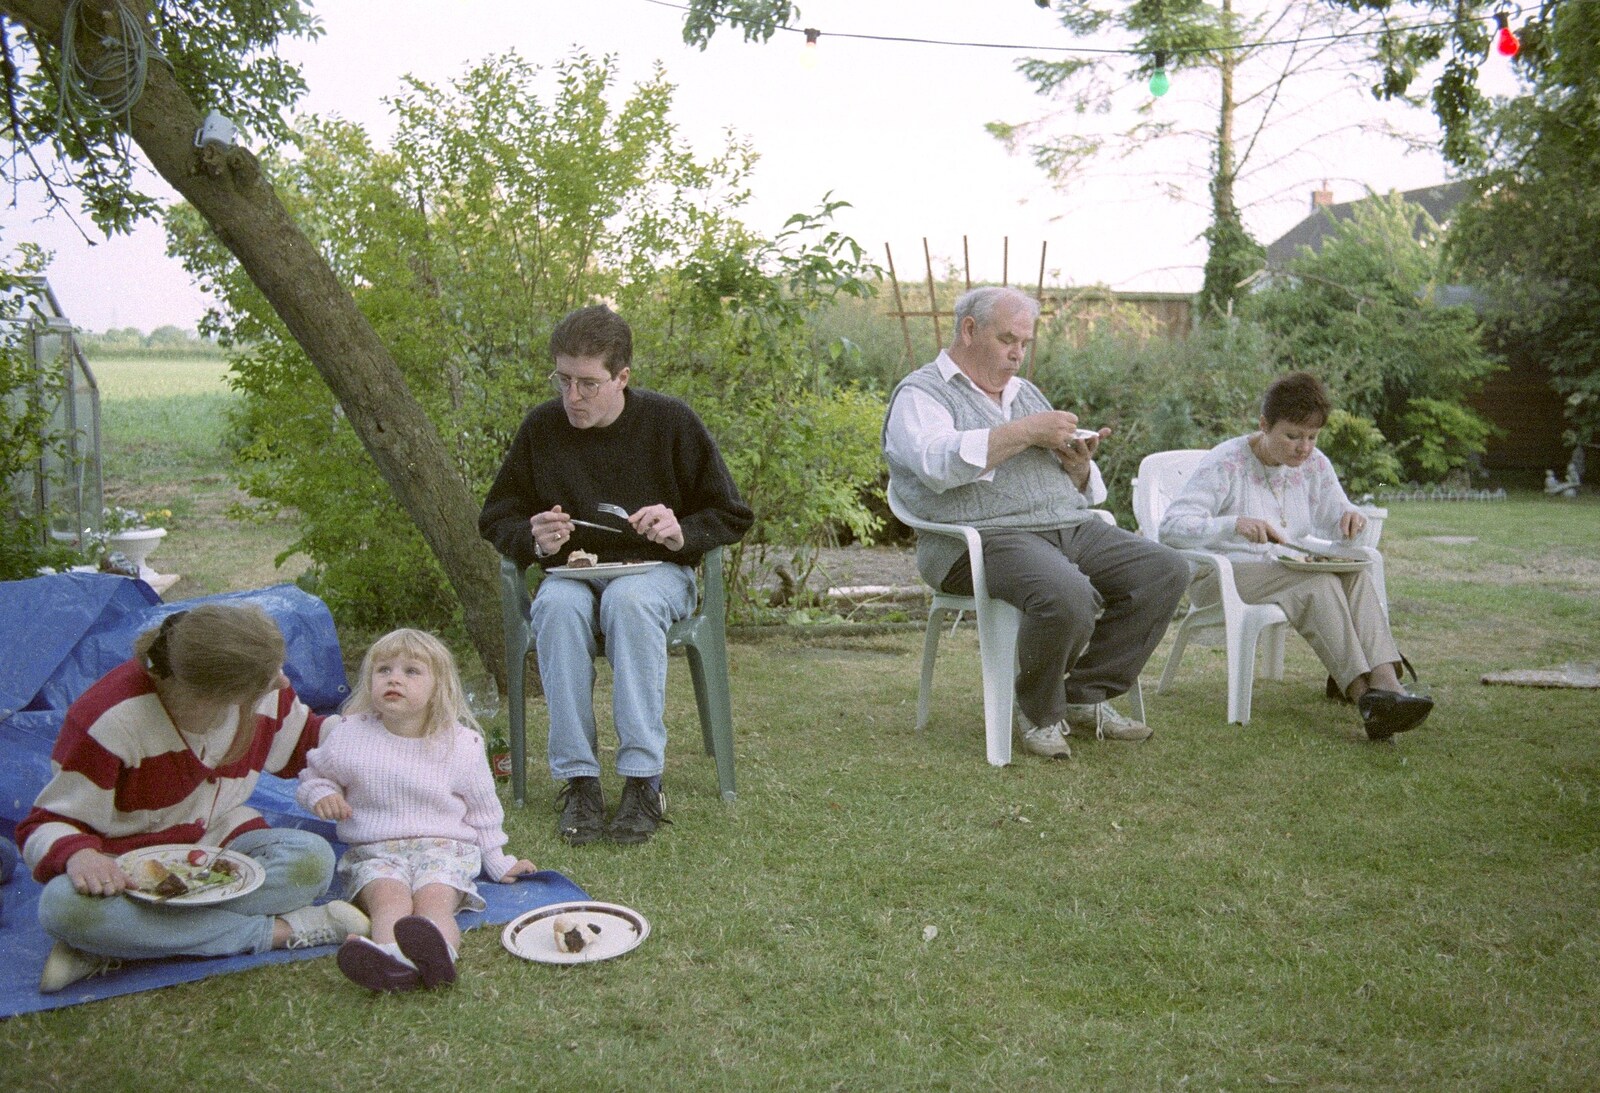 Birthday barbeque tea in the garden from Sarah's Birthday Barbeque, Burston, Norfolk - 7th June 1994